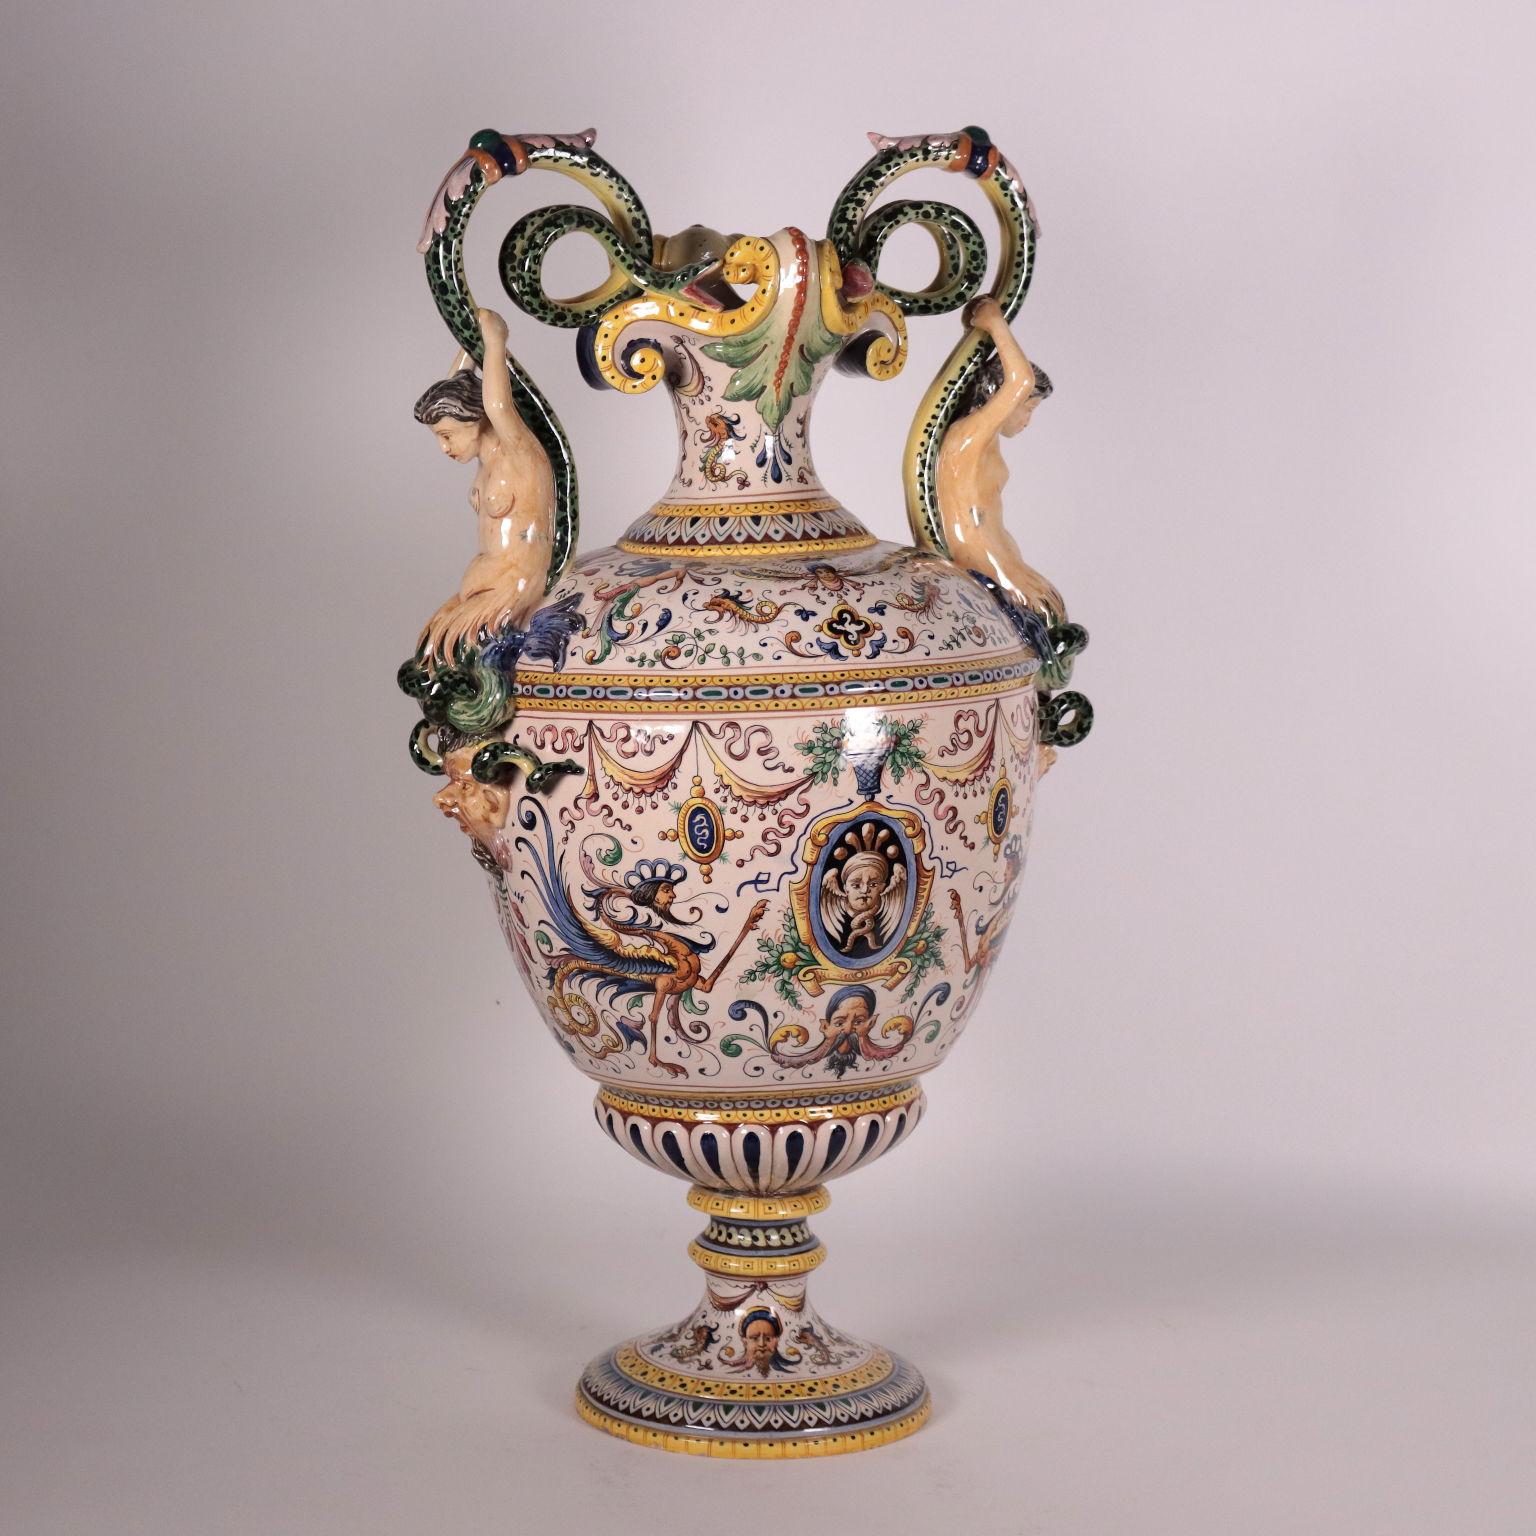 Sixteenth-century style majolica ceramica base with rich grotesque decoration; in the reserves, the bust of a young man and an allegorical figure. The handles are impressive, with snakes, mermaids and masks.